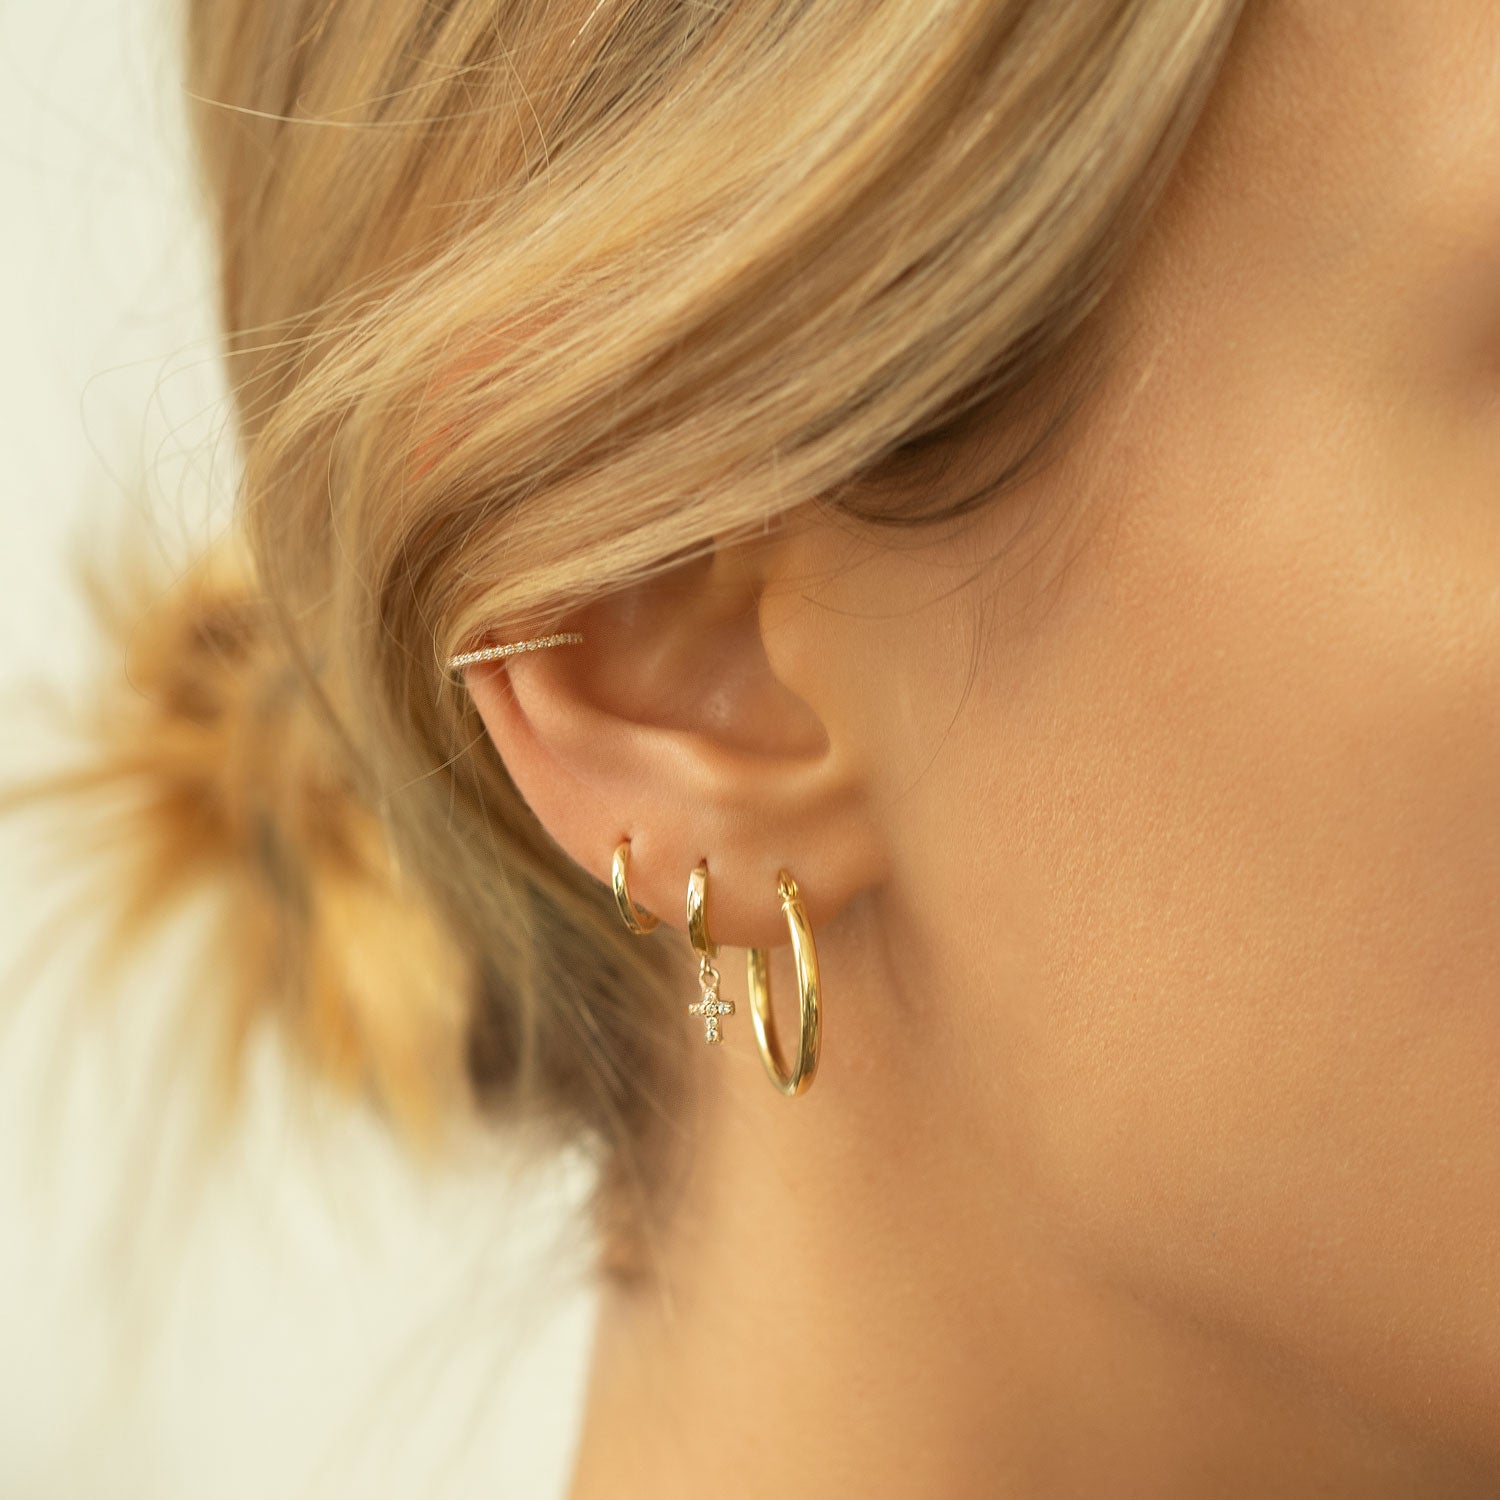 caption: Model wearing 7mm on second hole